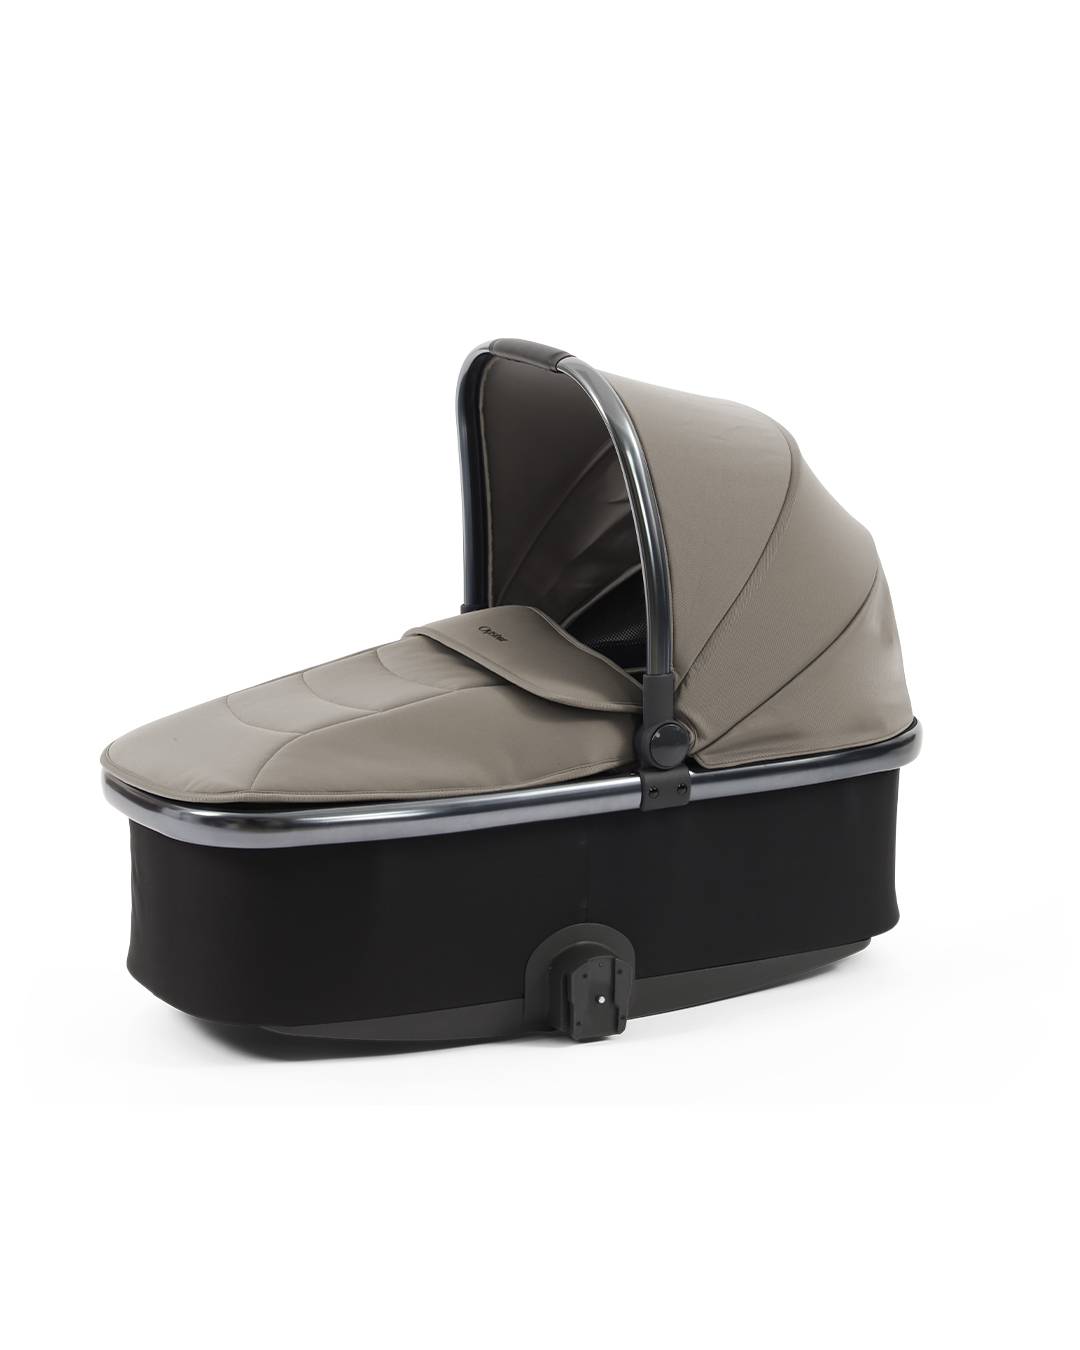 oyster 3 travel system rain cover